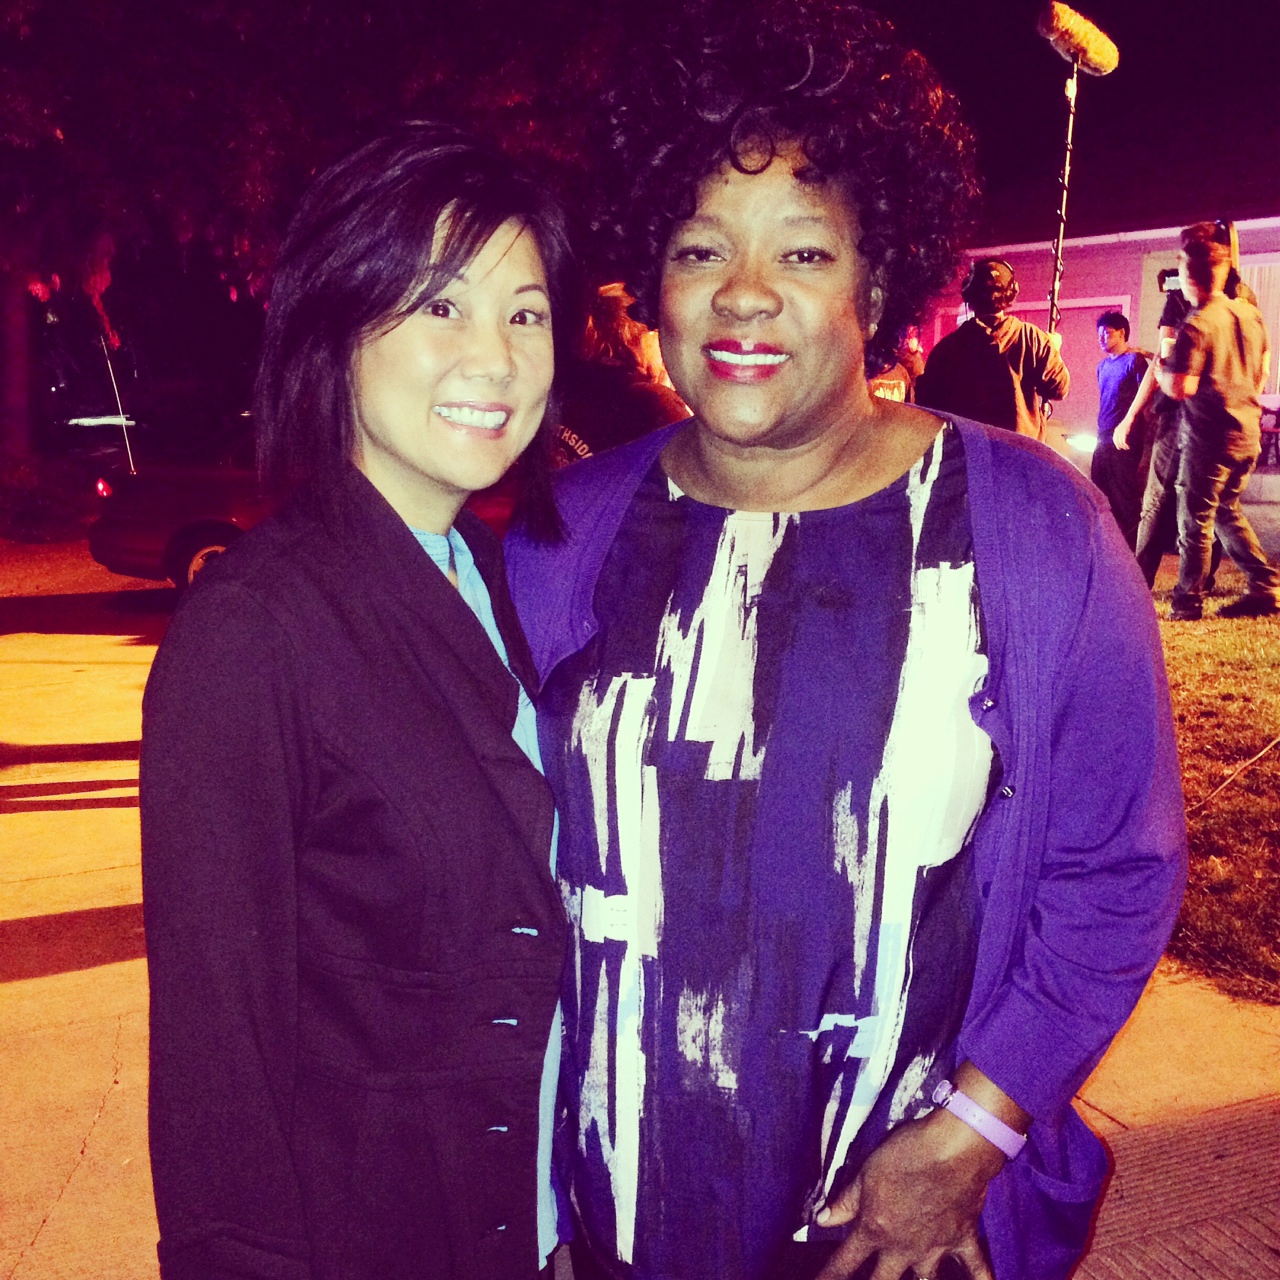 With actress, Loretta Devine, for the feature film, 1440 AND COUNTING, directed by Tony Gapastione.